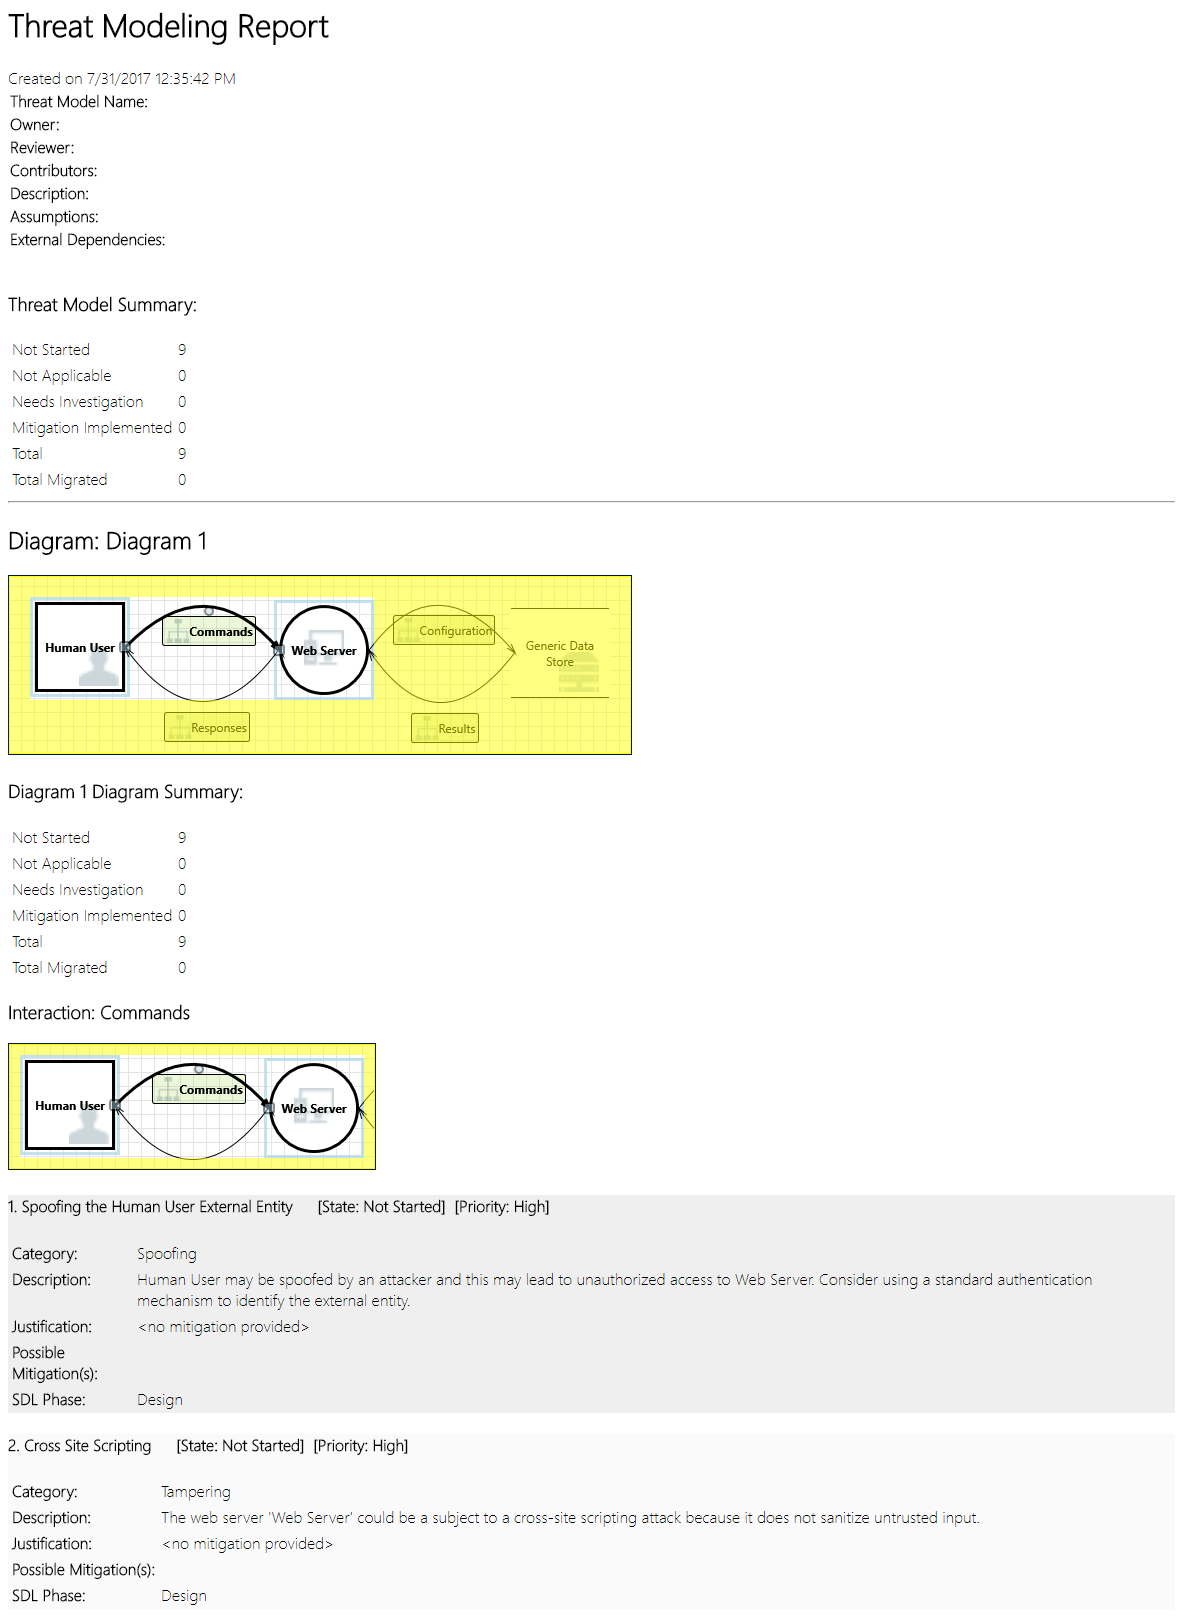 Screenshot shows an example Threat Modeling Report, including a summary, diagrams, and other information.